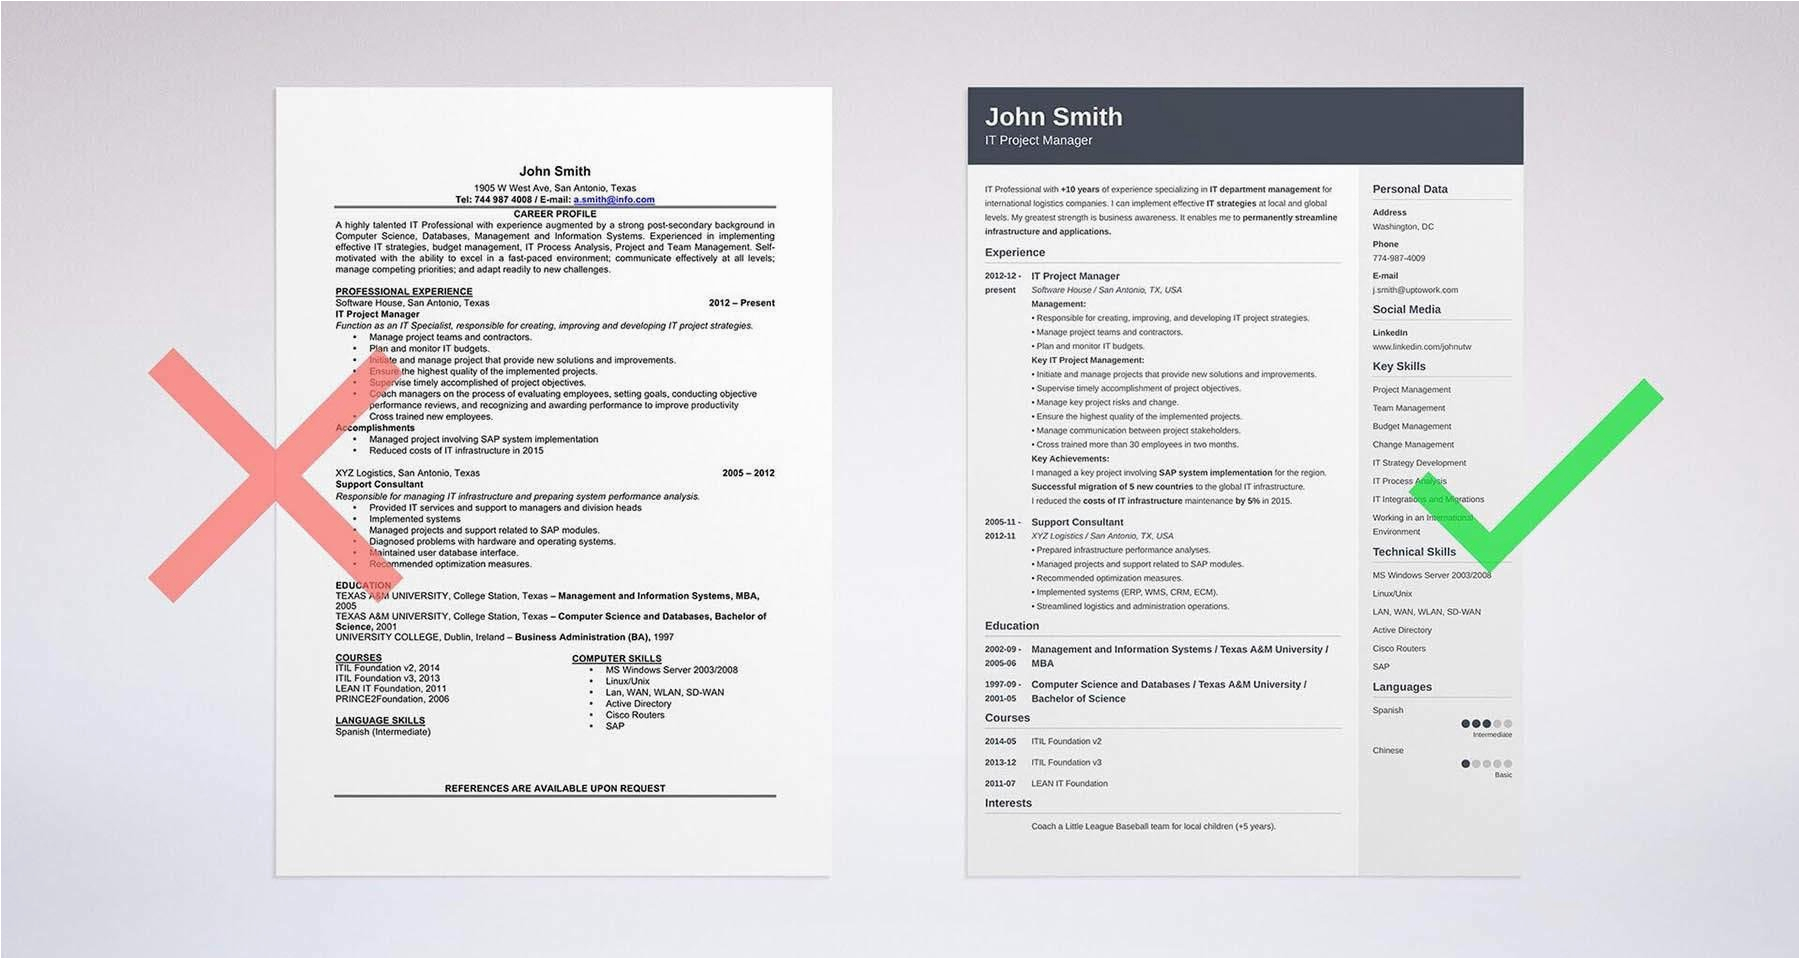 Create Your Resume Using General Templates 20 Resume Objective Examples Use them Your Resume Tips